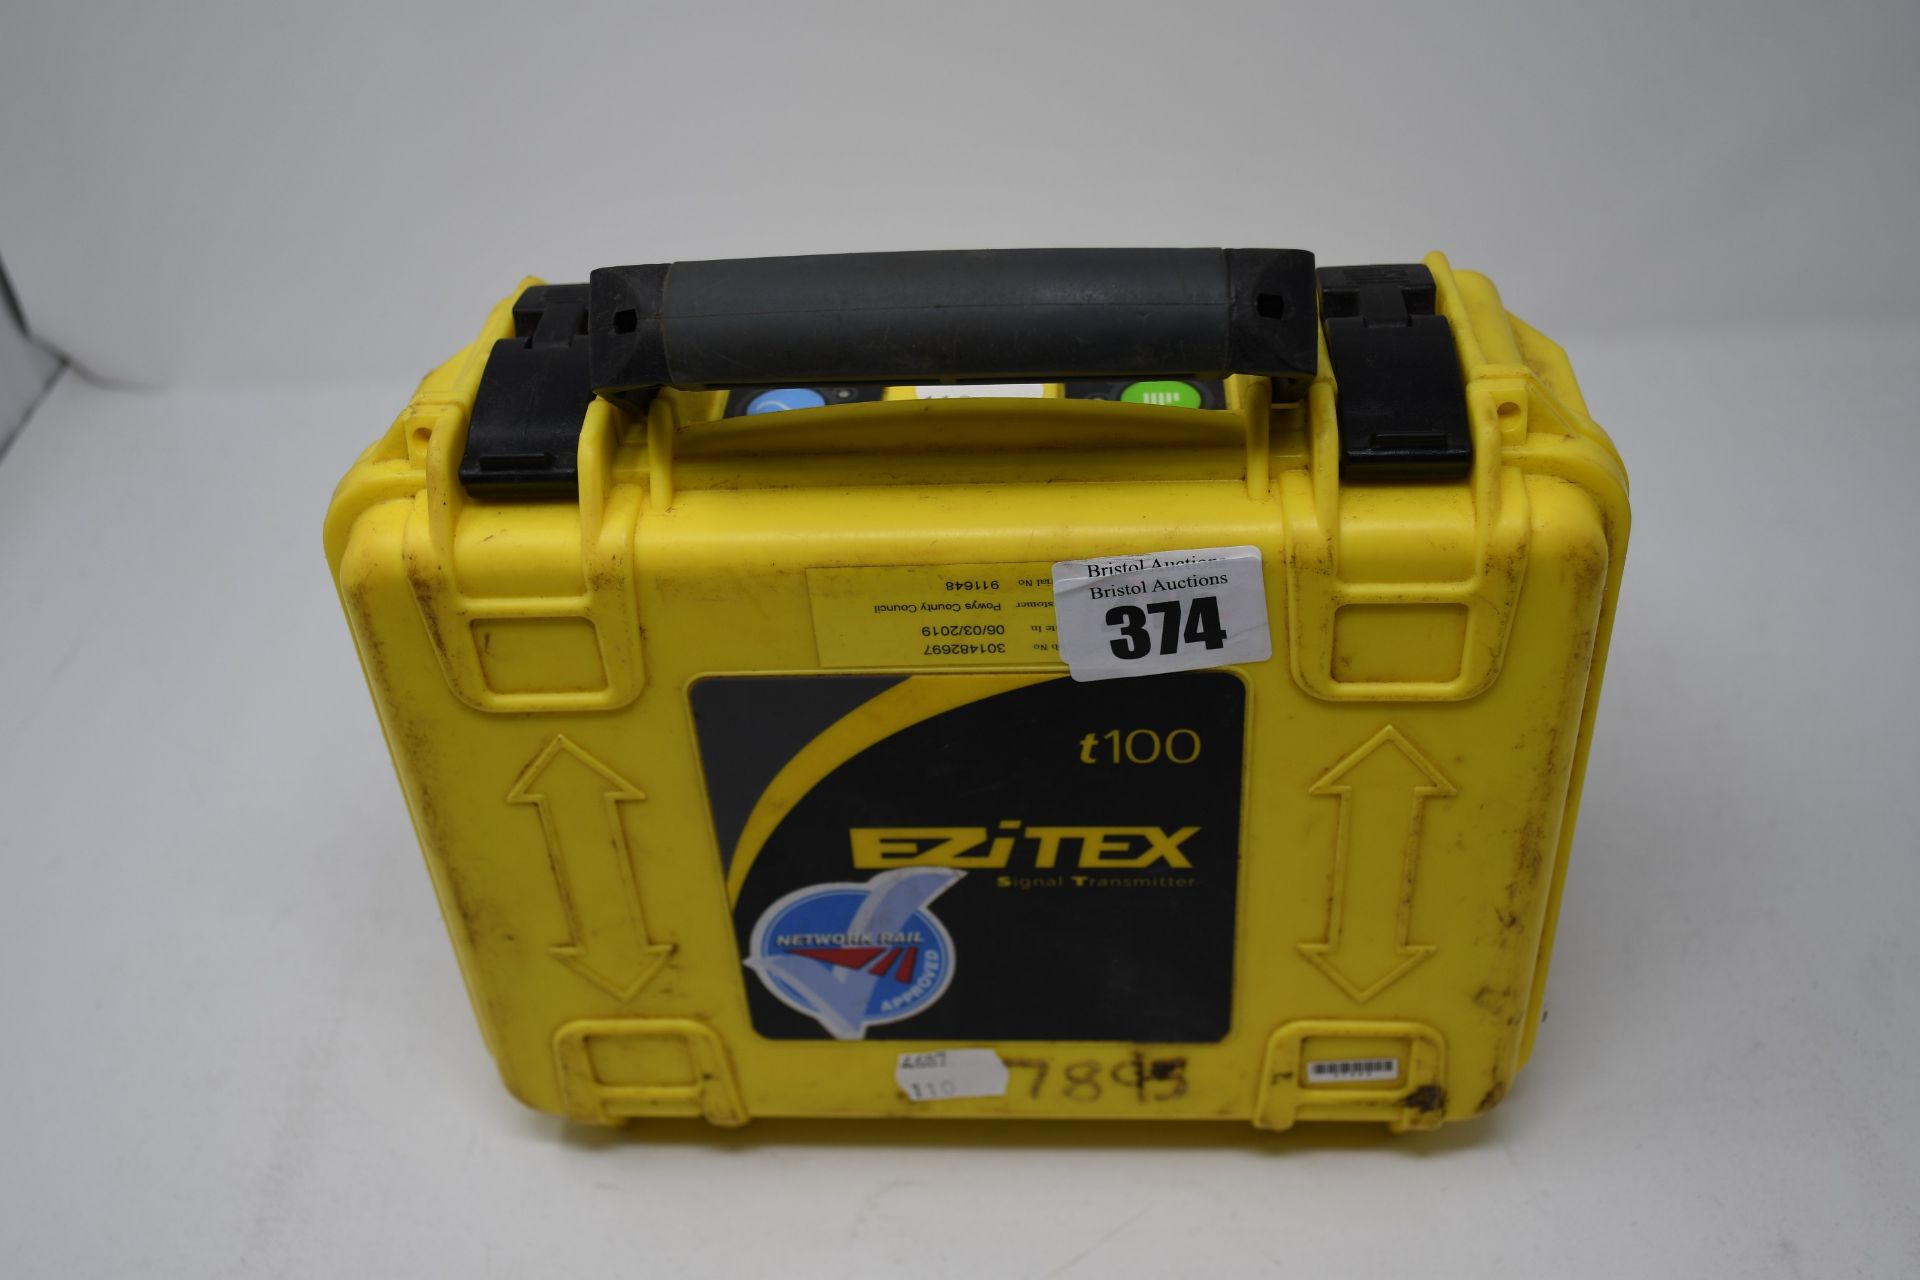 One pre-owned Ezitex signal transmitter t100.